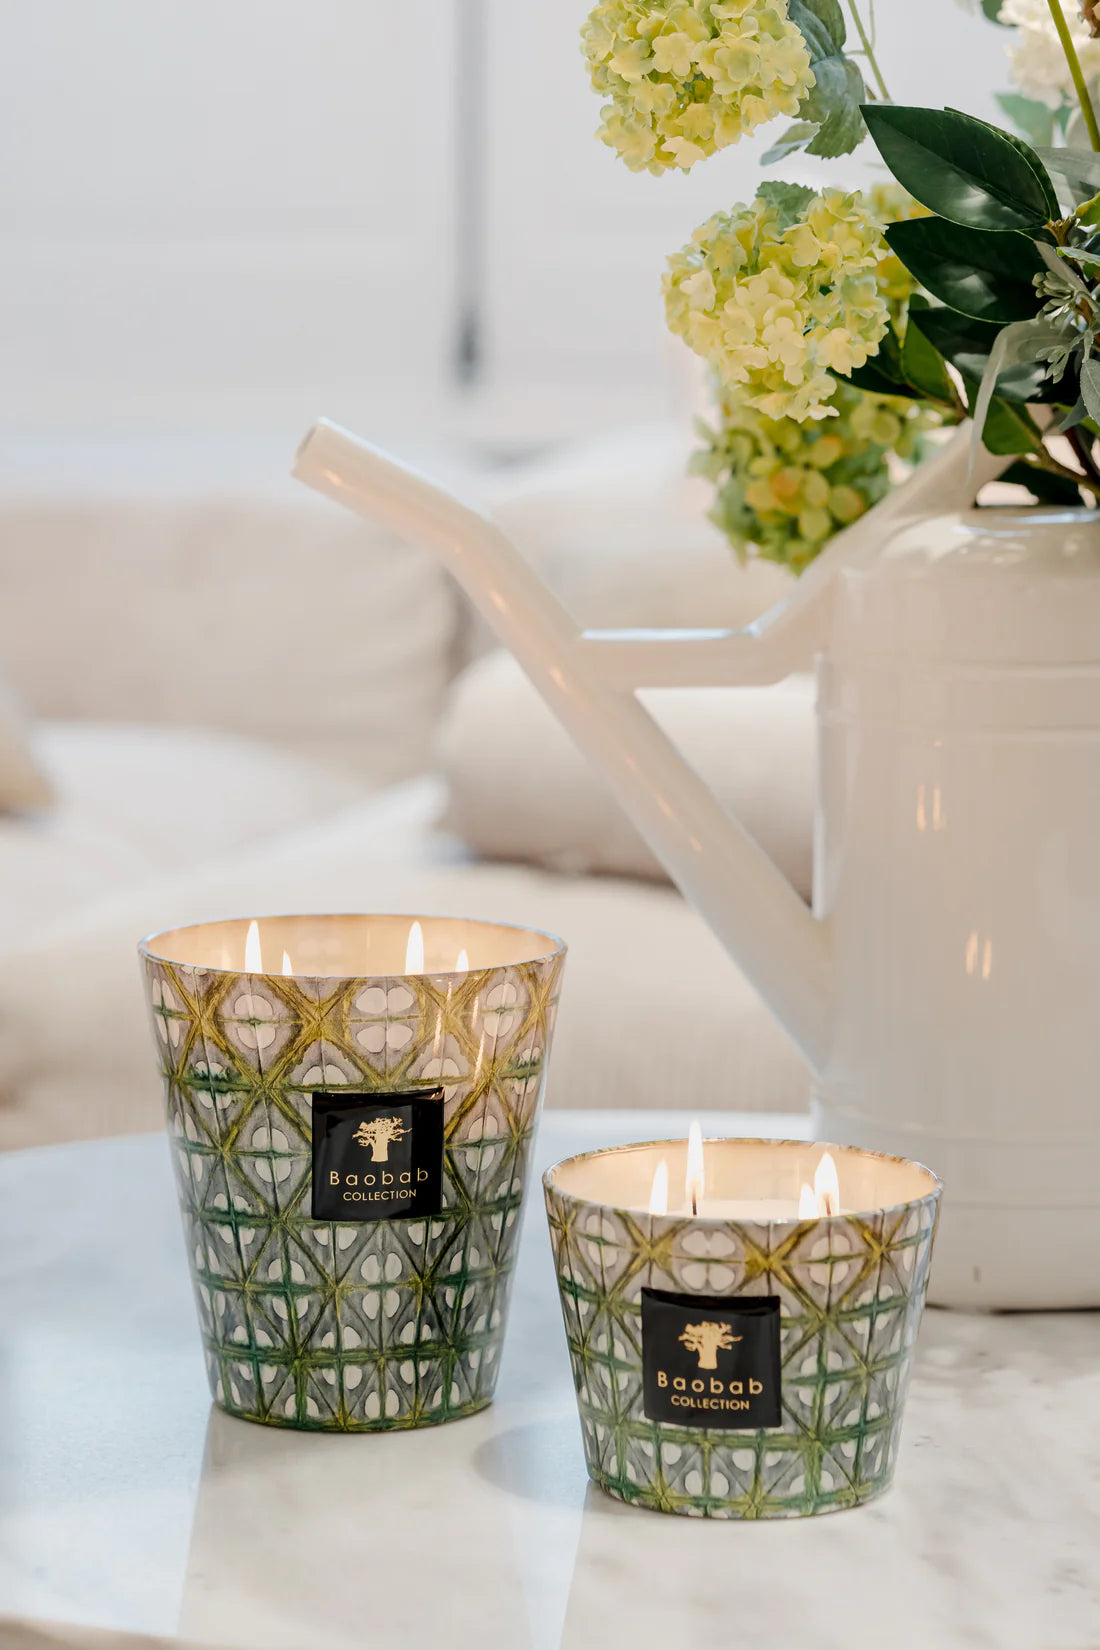 BAOBAB COLLECTION CANDLE BOHOMANIA LAZLO (Available in 3 Sizes)